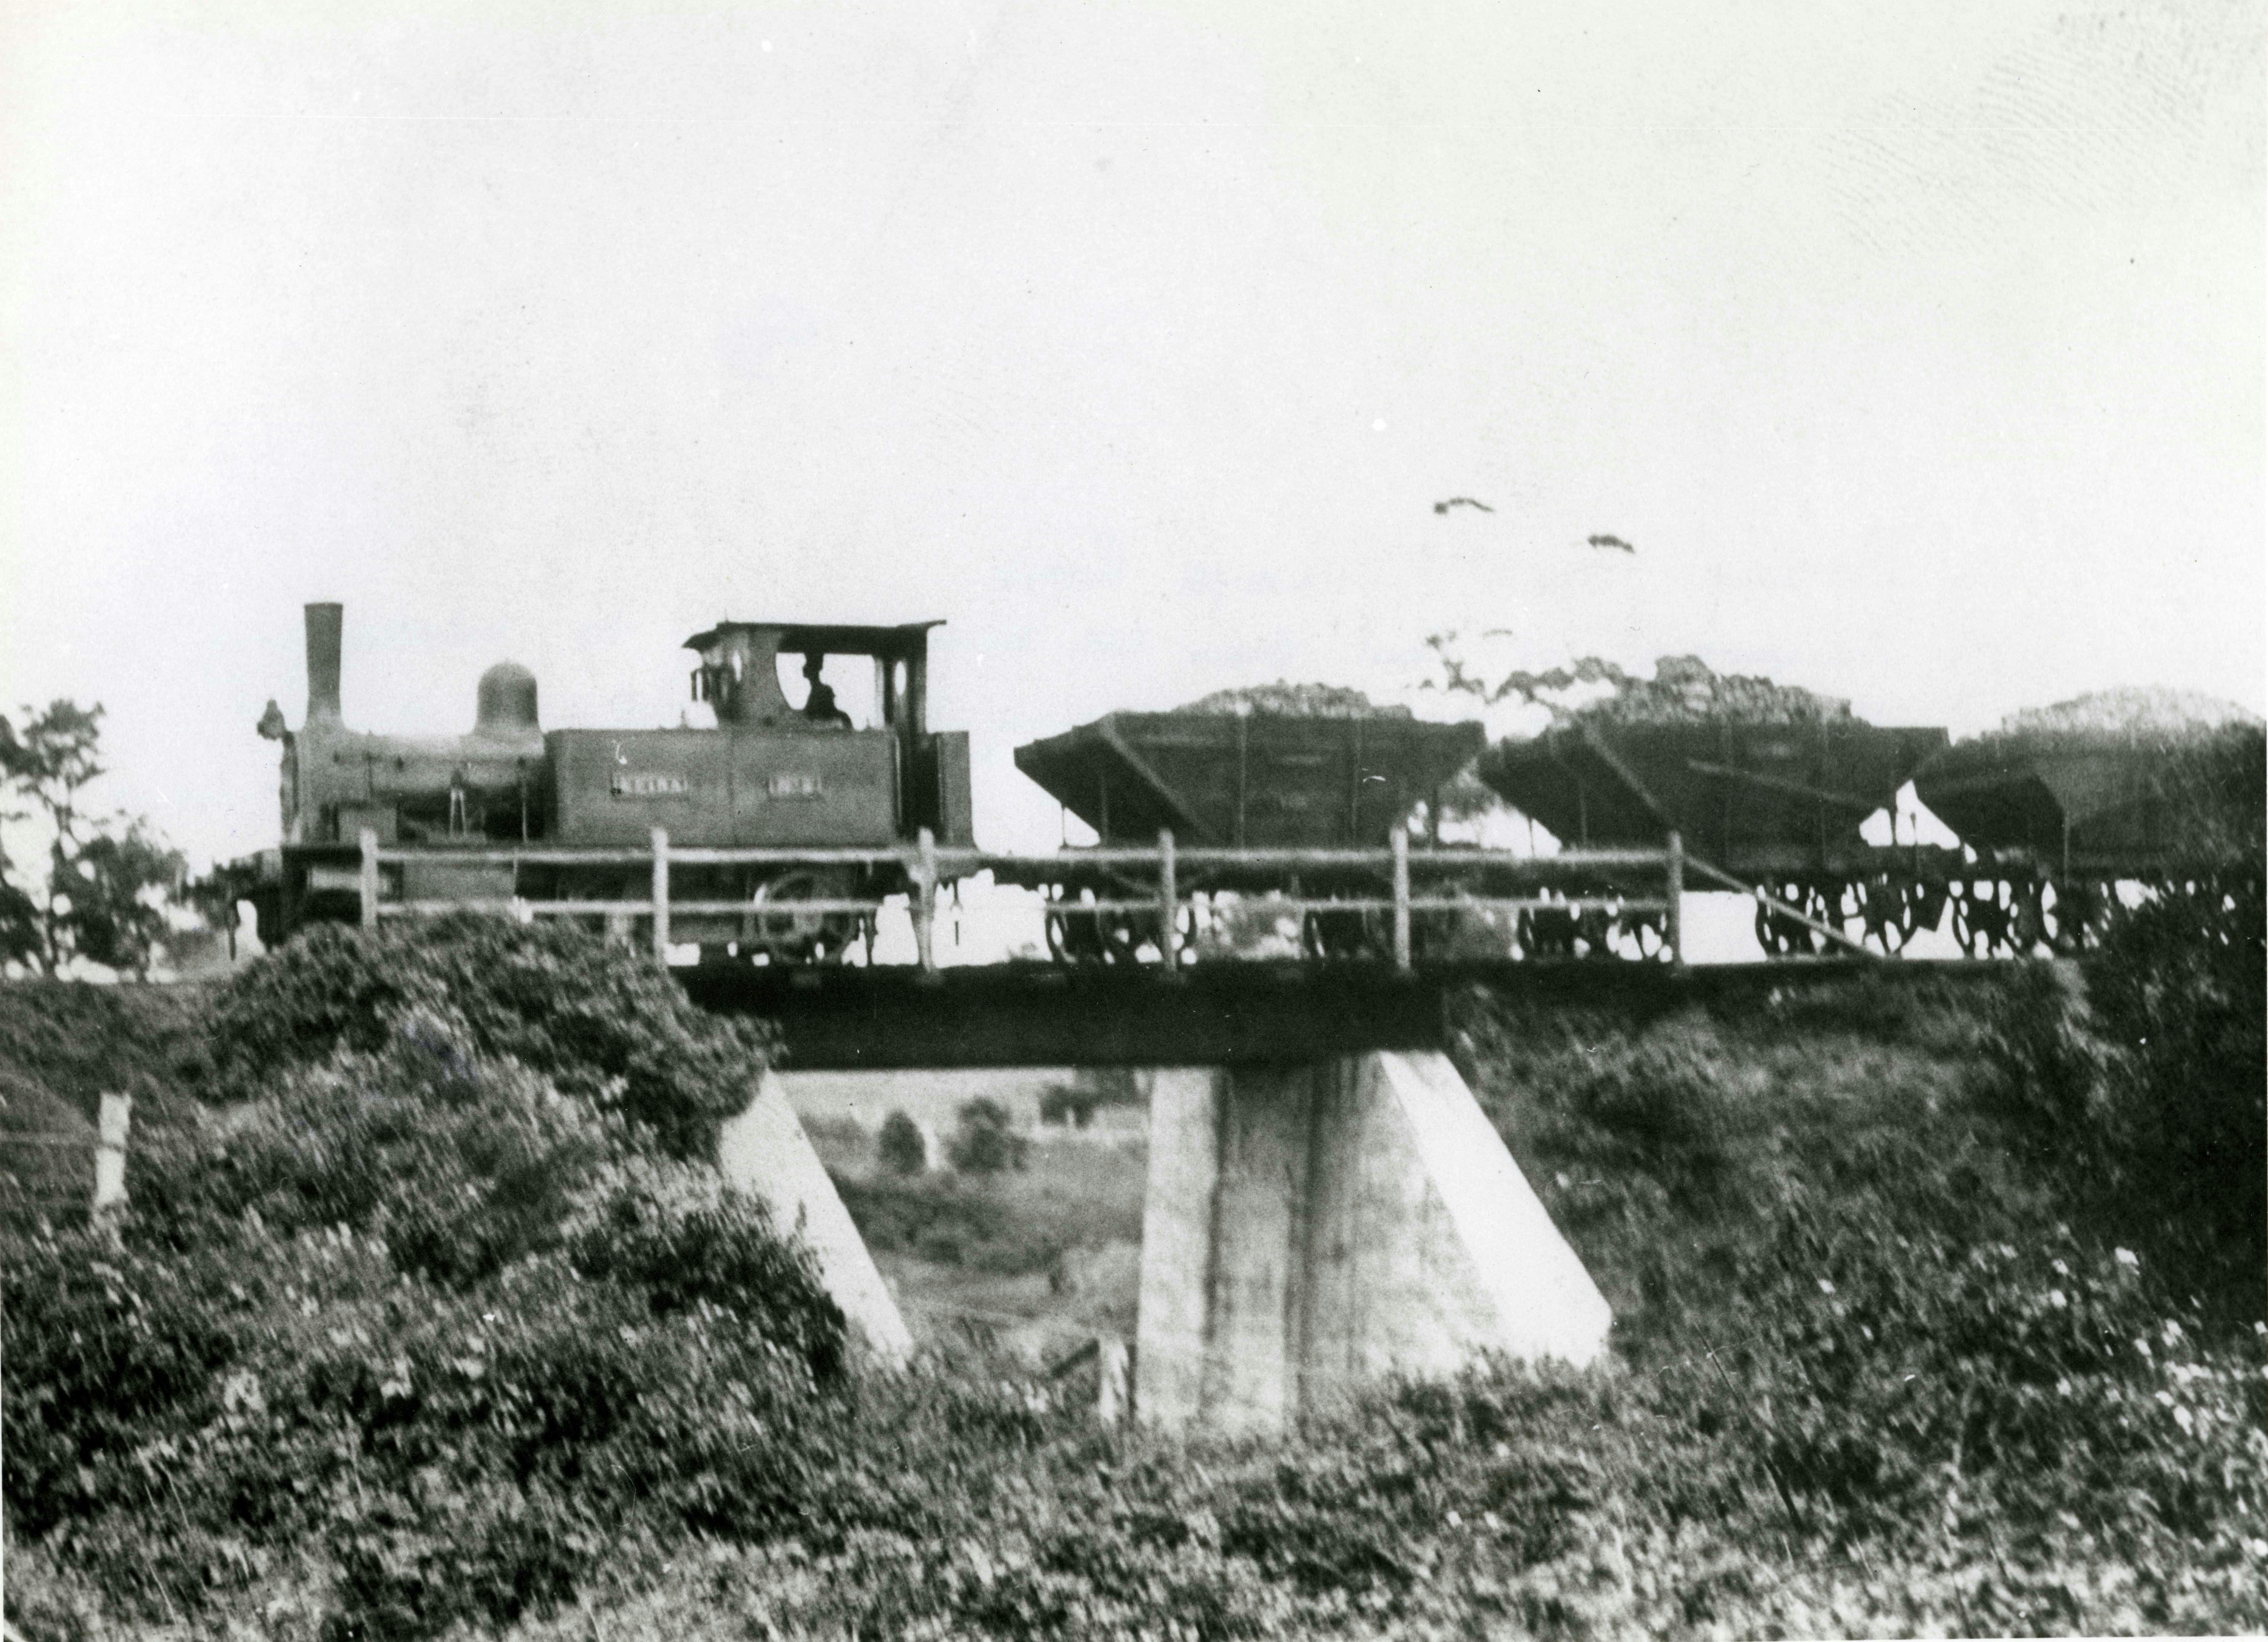 Tramline (Wollongong City Library, Local Studies collection)